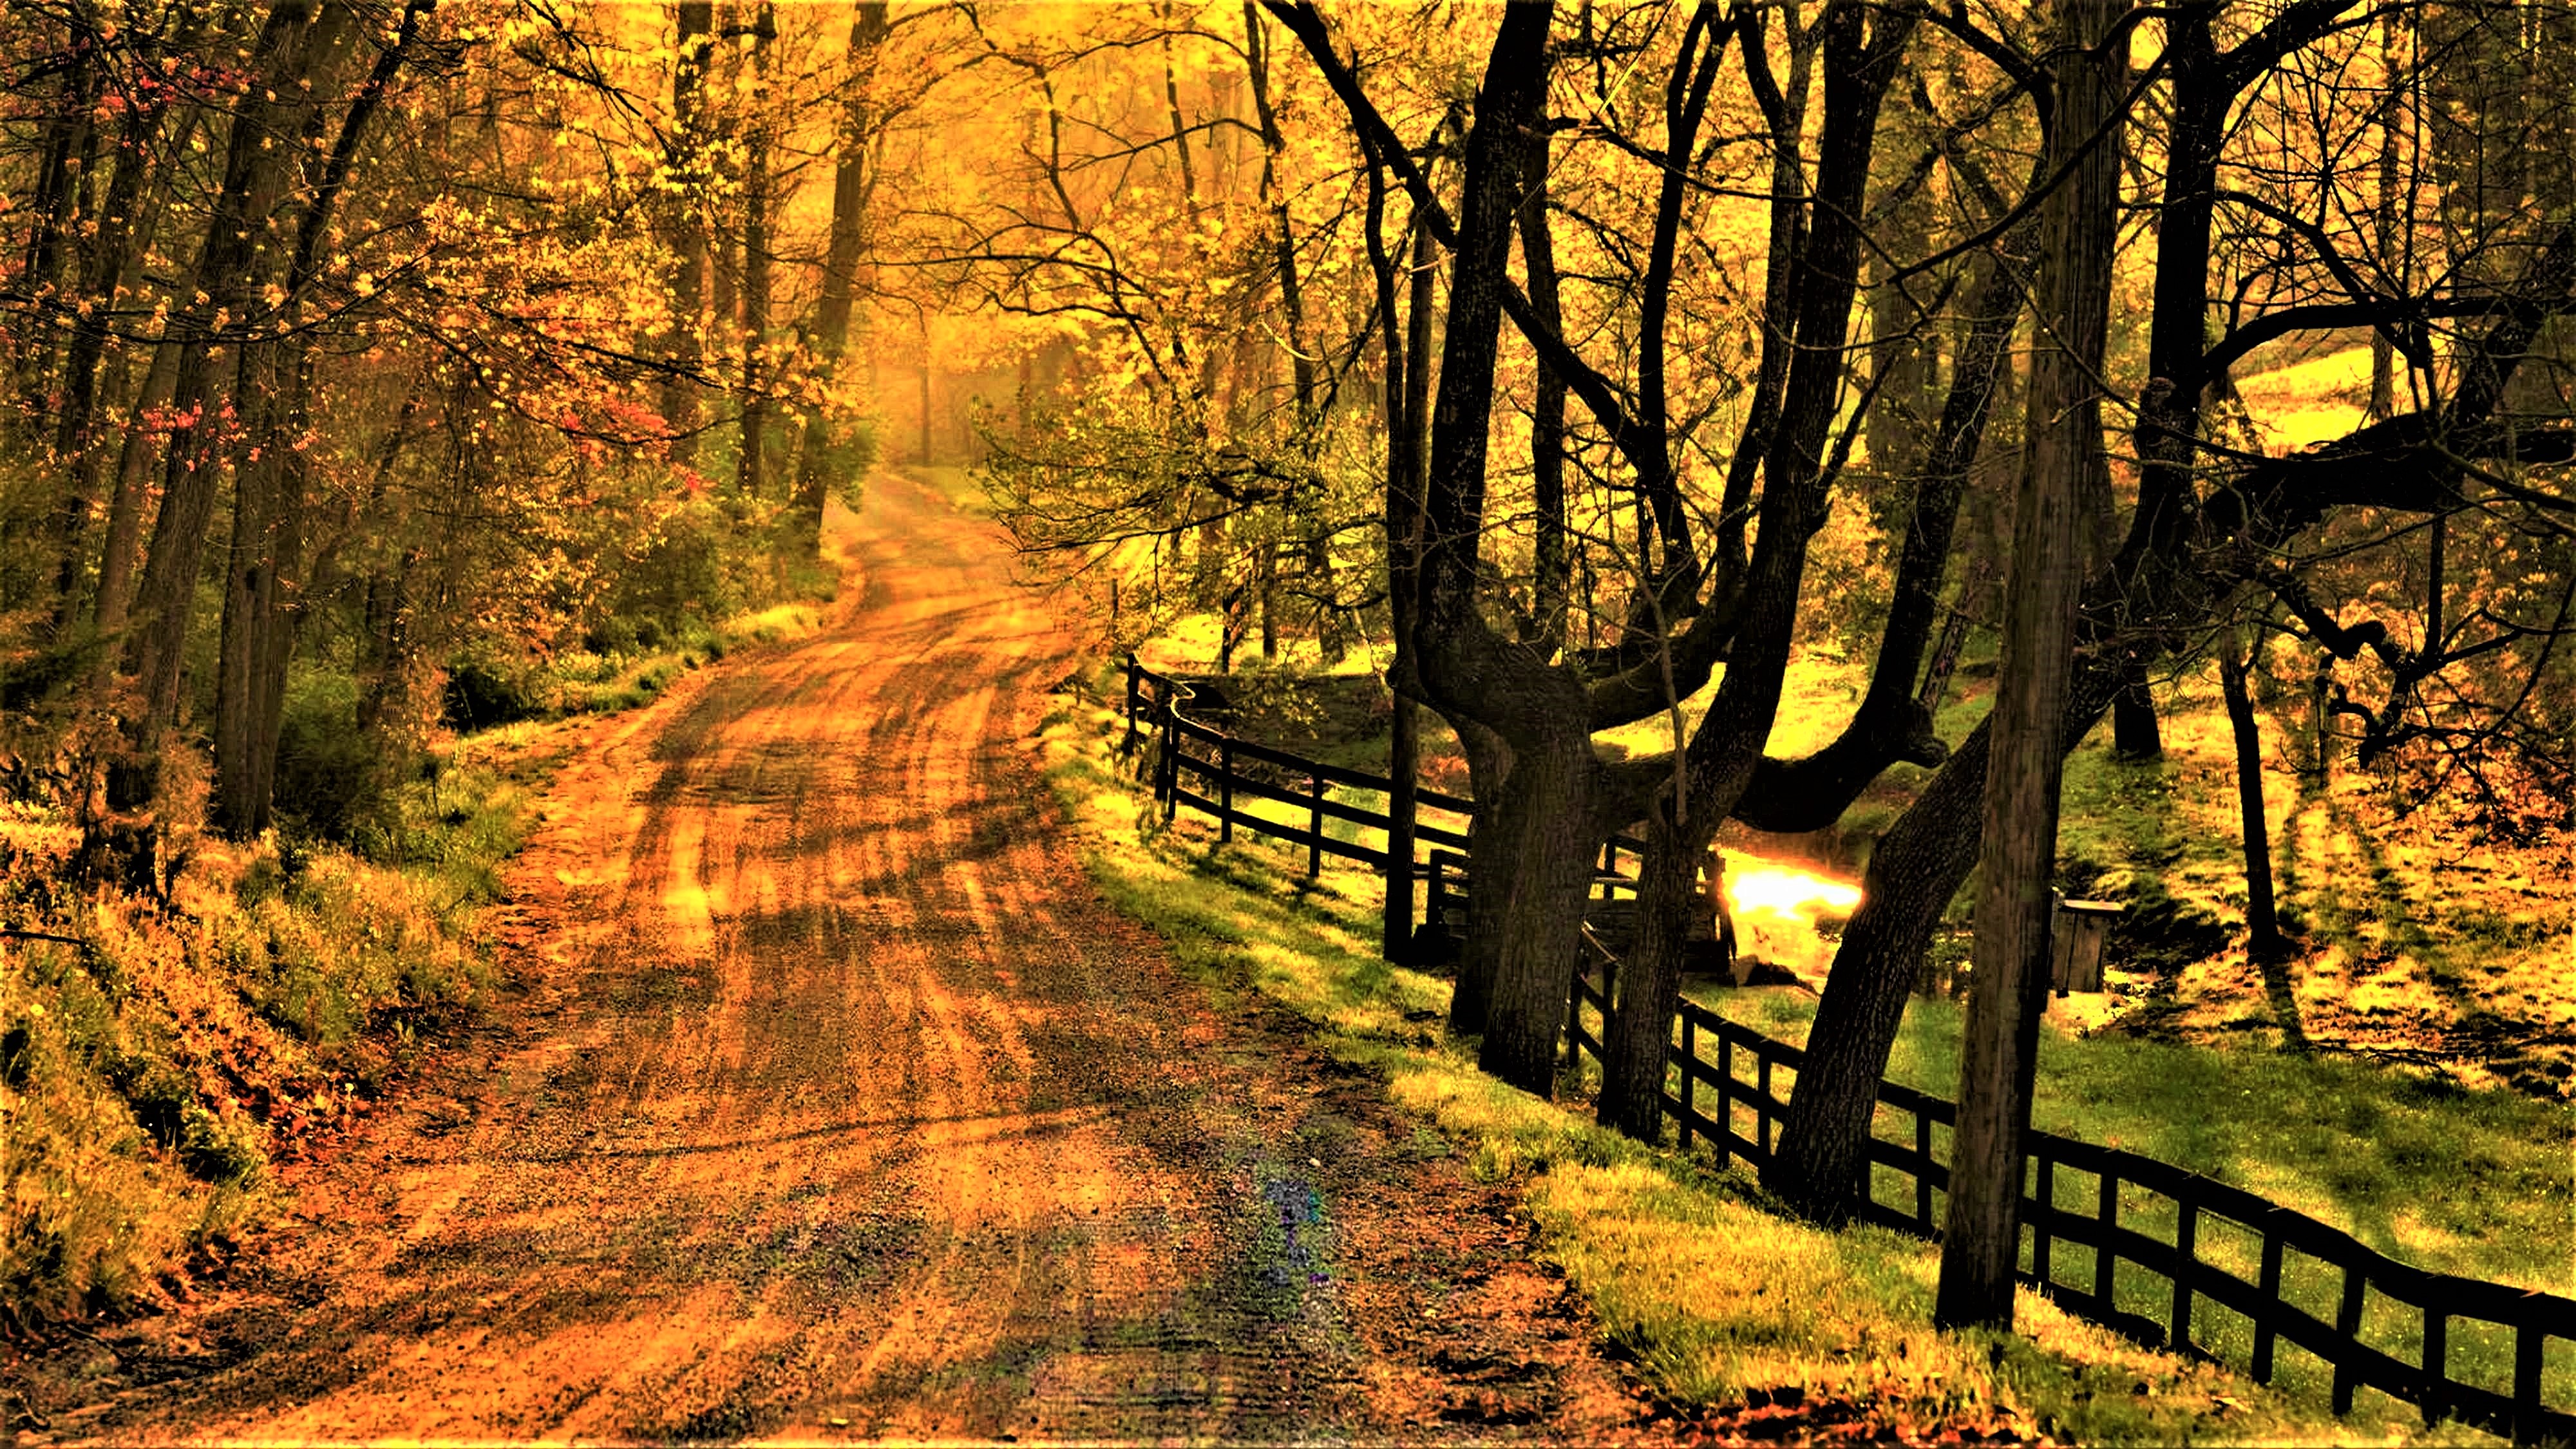 Dirt Road in Autumn - Image Abyss